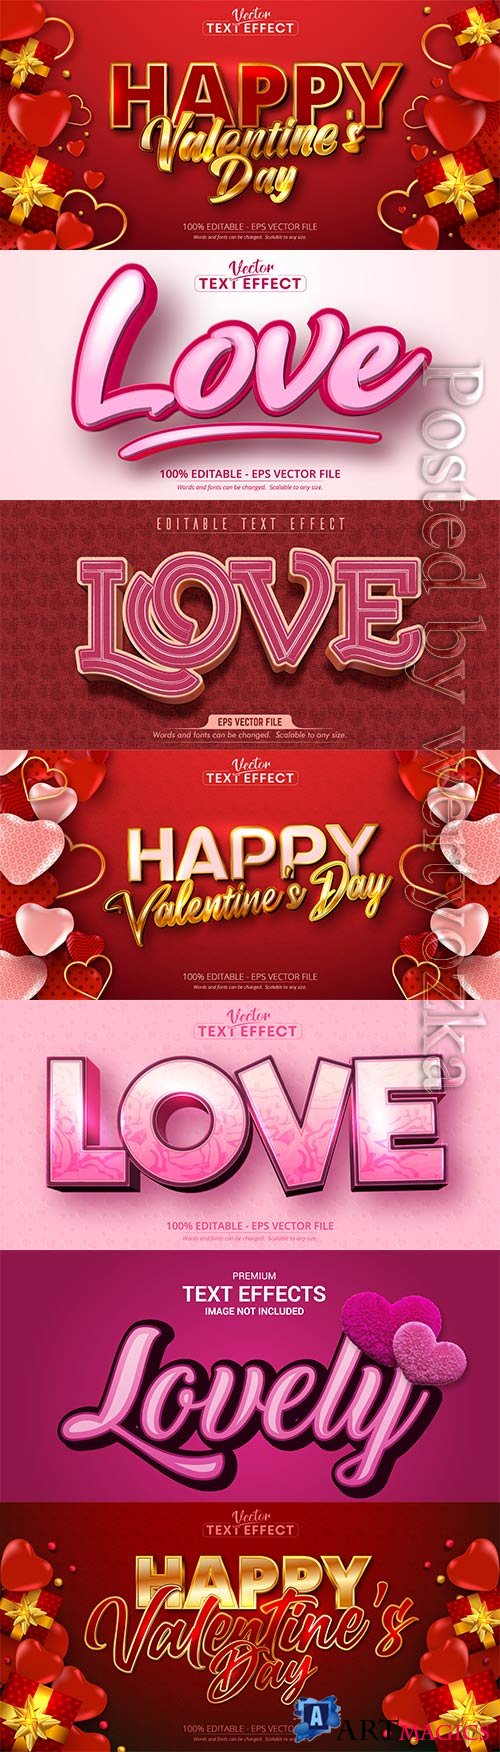 Valentine text effects style in vector with hearts